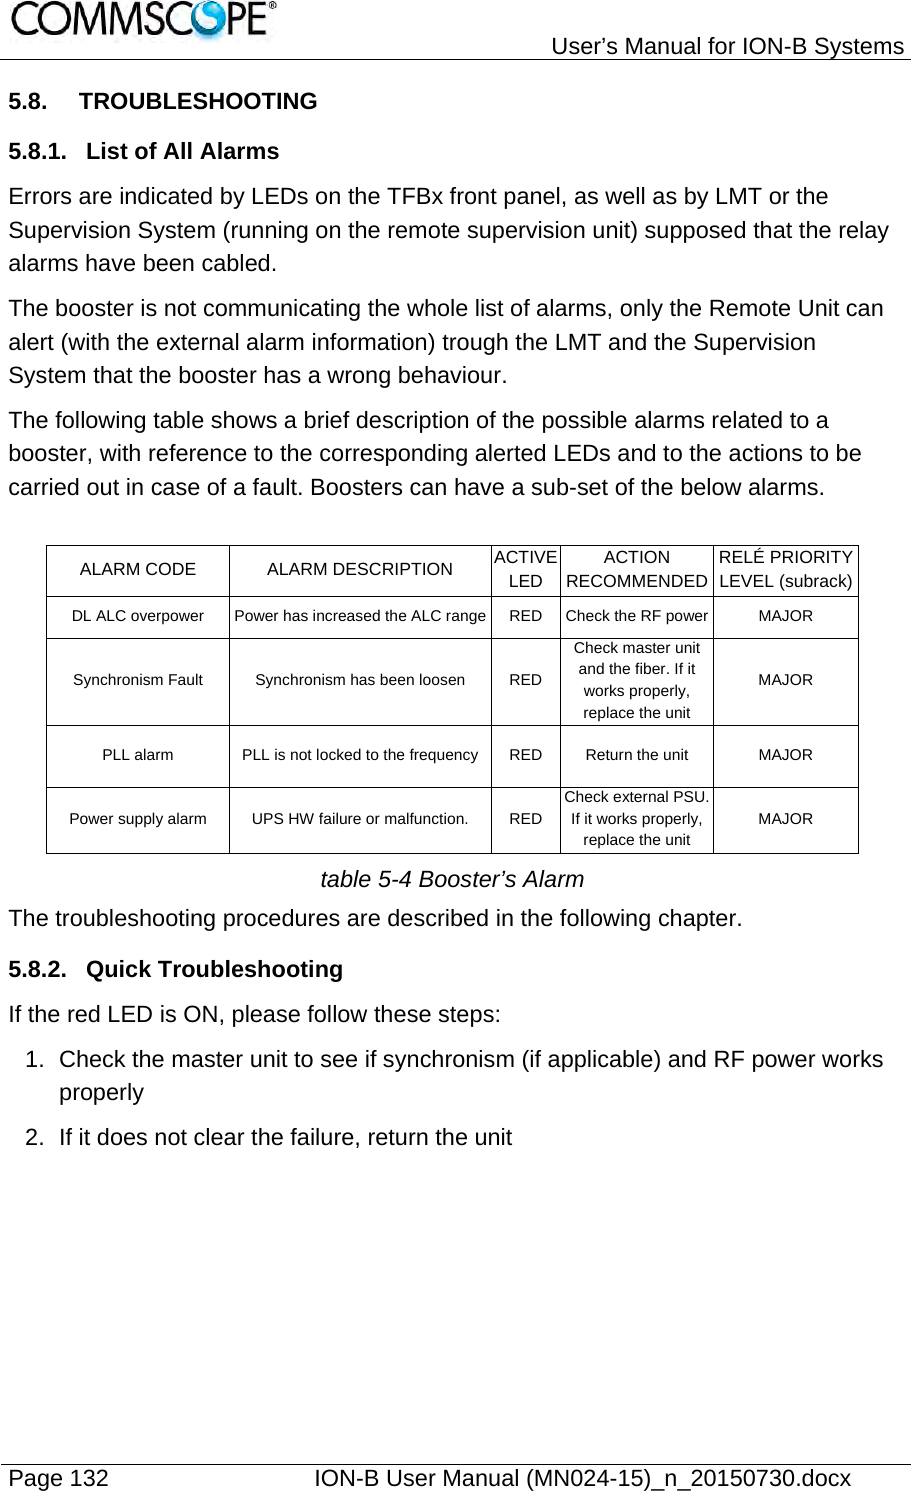   User’s Manual for ION-B Systems Page 132    ION-B User Manual (MN024-15)_n_20150730.docx  5.8. TROUBLESHOOTING 5.8.1.  List of All Alarms Errors are indicated by LEDs on the TFBx front panel, as well as by LMT or the Supervision System (running on the remote supervision unit) supposed that the relay alarms have been cabled. The booster is not communicating the whole list of alarms, only the Remote Unit can alert (with the external alarm information) trough the LMT and the Supervision System that the booster has a wrong behaviour. The following table shows a brief description of the possible alarms related to a booster, with reference to the corresponding alerted LEDs and to the actions to be carried out in case of a fault. Boosters can have a sub-set of the below alarms.  ALARM CODE  ALARM DESCRIPTION ACTIVE LED ACTION RECOMMENDEDRELÉ PRIORITY LEVEL (subrack)DL ALC overpower Power has increased the ALC range RED Check the RF power MAJOR Synchronism Fault Synchronism has been loosen  RED Check master unit and the fiber. If it works properly, replace the unit MAJOR PLL alarm  PLL is not locked to the frequency  RED  Return the unit  MAJOR Power supply alarm UPS HW failure or malfunction. RED Check external PSU. If it works properly, replace the unit MAJOR table 5-4 Booster’s Alarm The troubleshooting procedures are described in the following chapter. 5.8.2. Quick Troubleshooting If the red LED is ON, please follow these steps: 1.  Check the master unit to see if synchronism (if applicable) and RF power works properly 2.  If it does not clear the failure, return the unit  